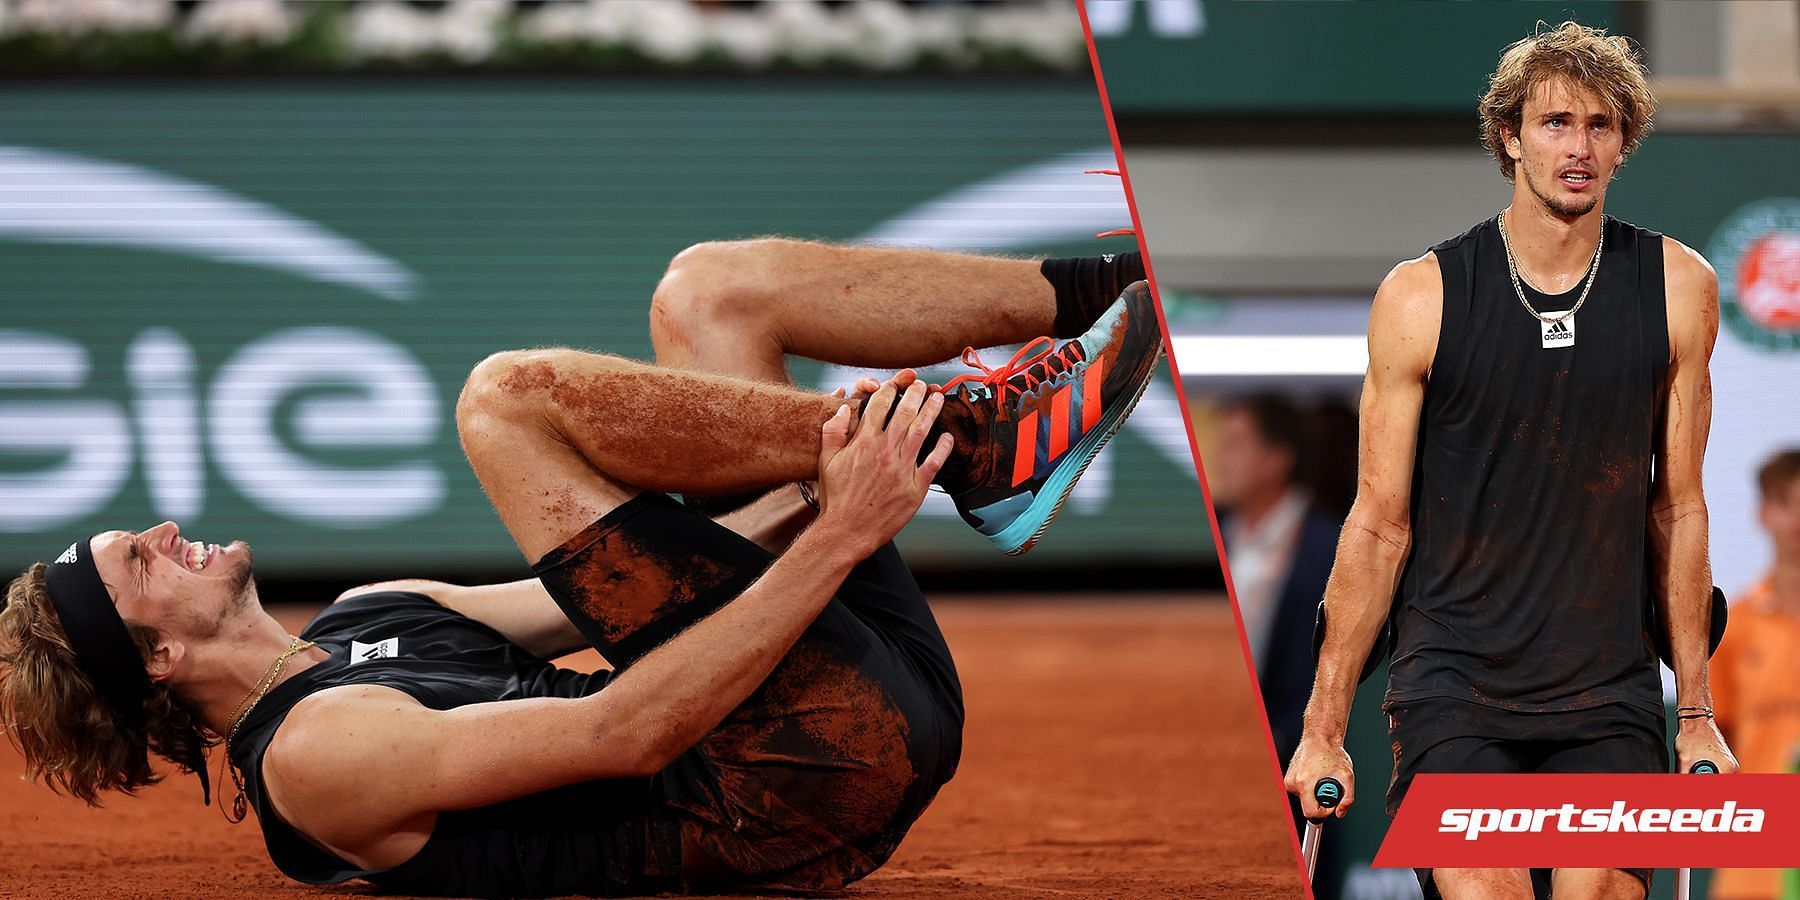 Alexander Zverev was forced to retire mid-match after an ankle injury in the 2022 Roland Garros semifinal.